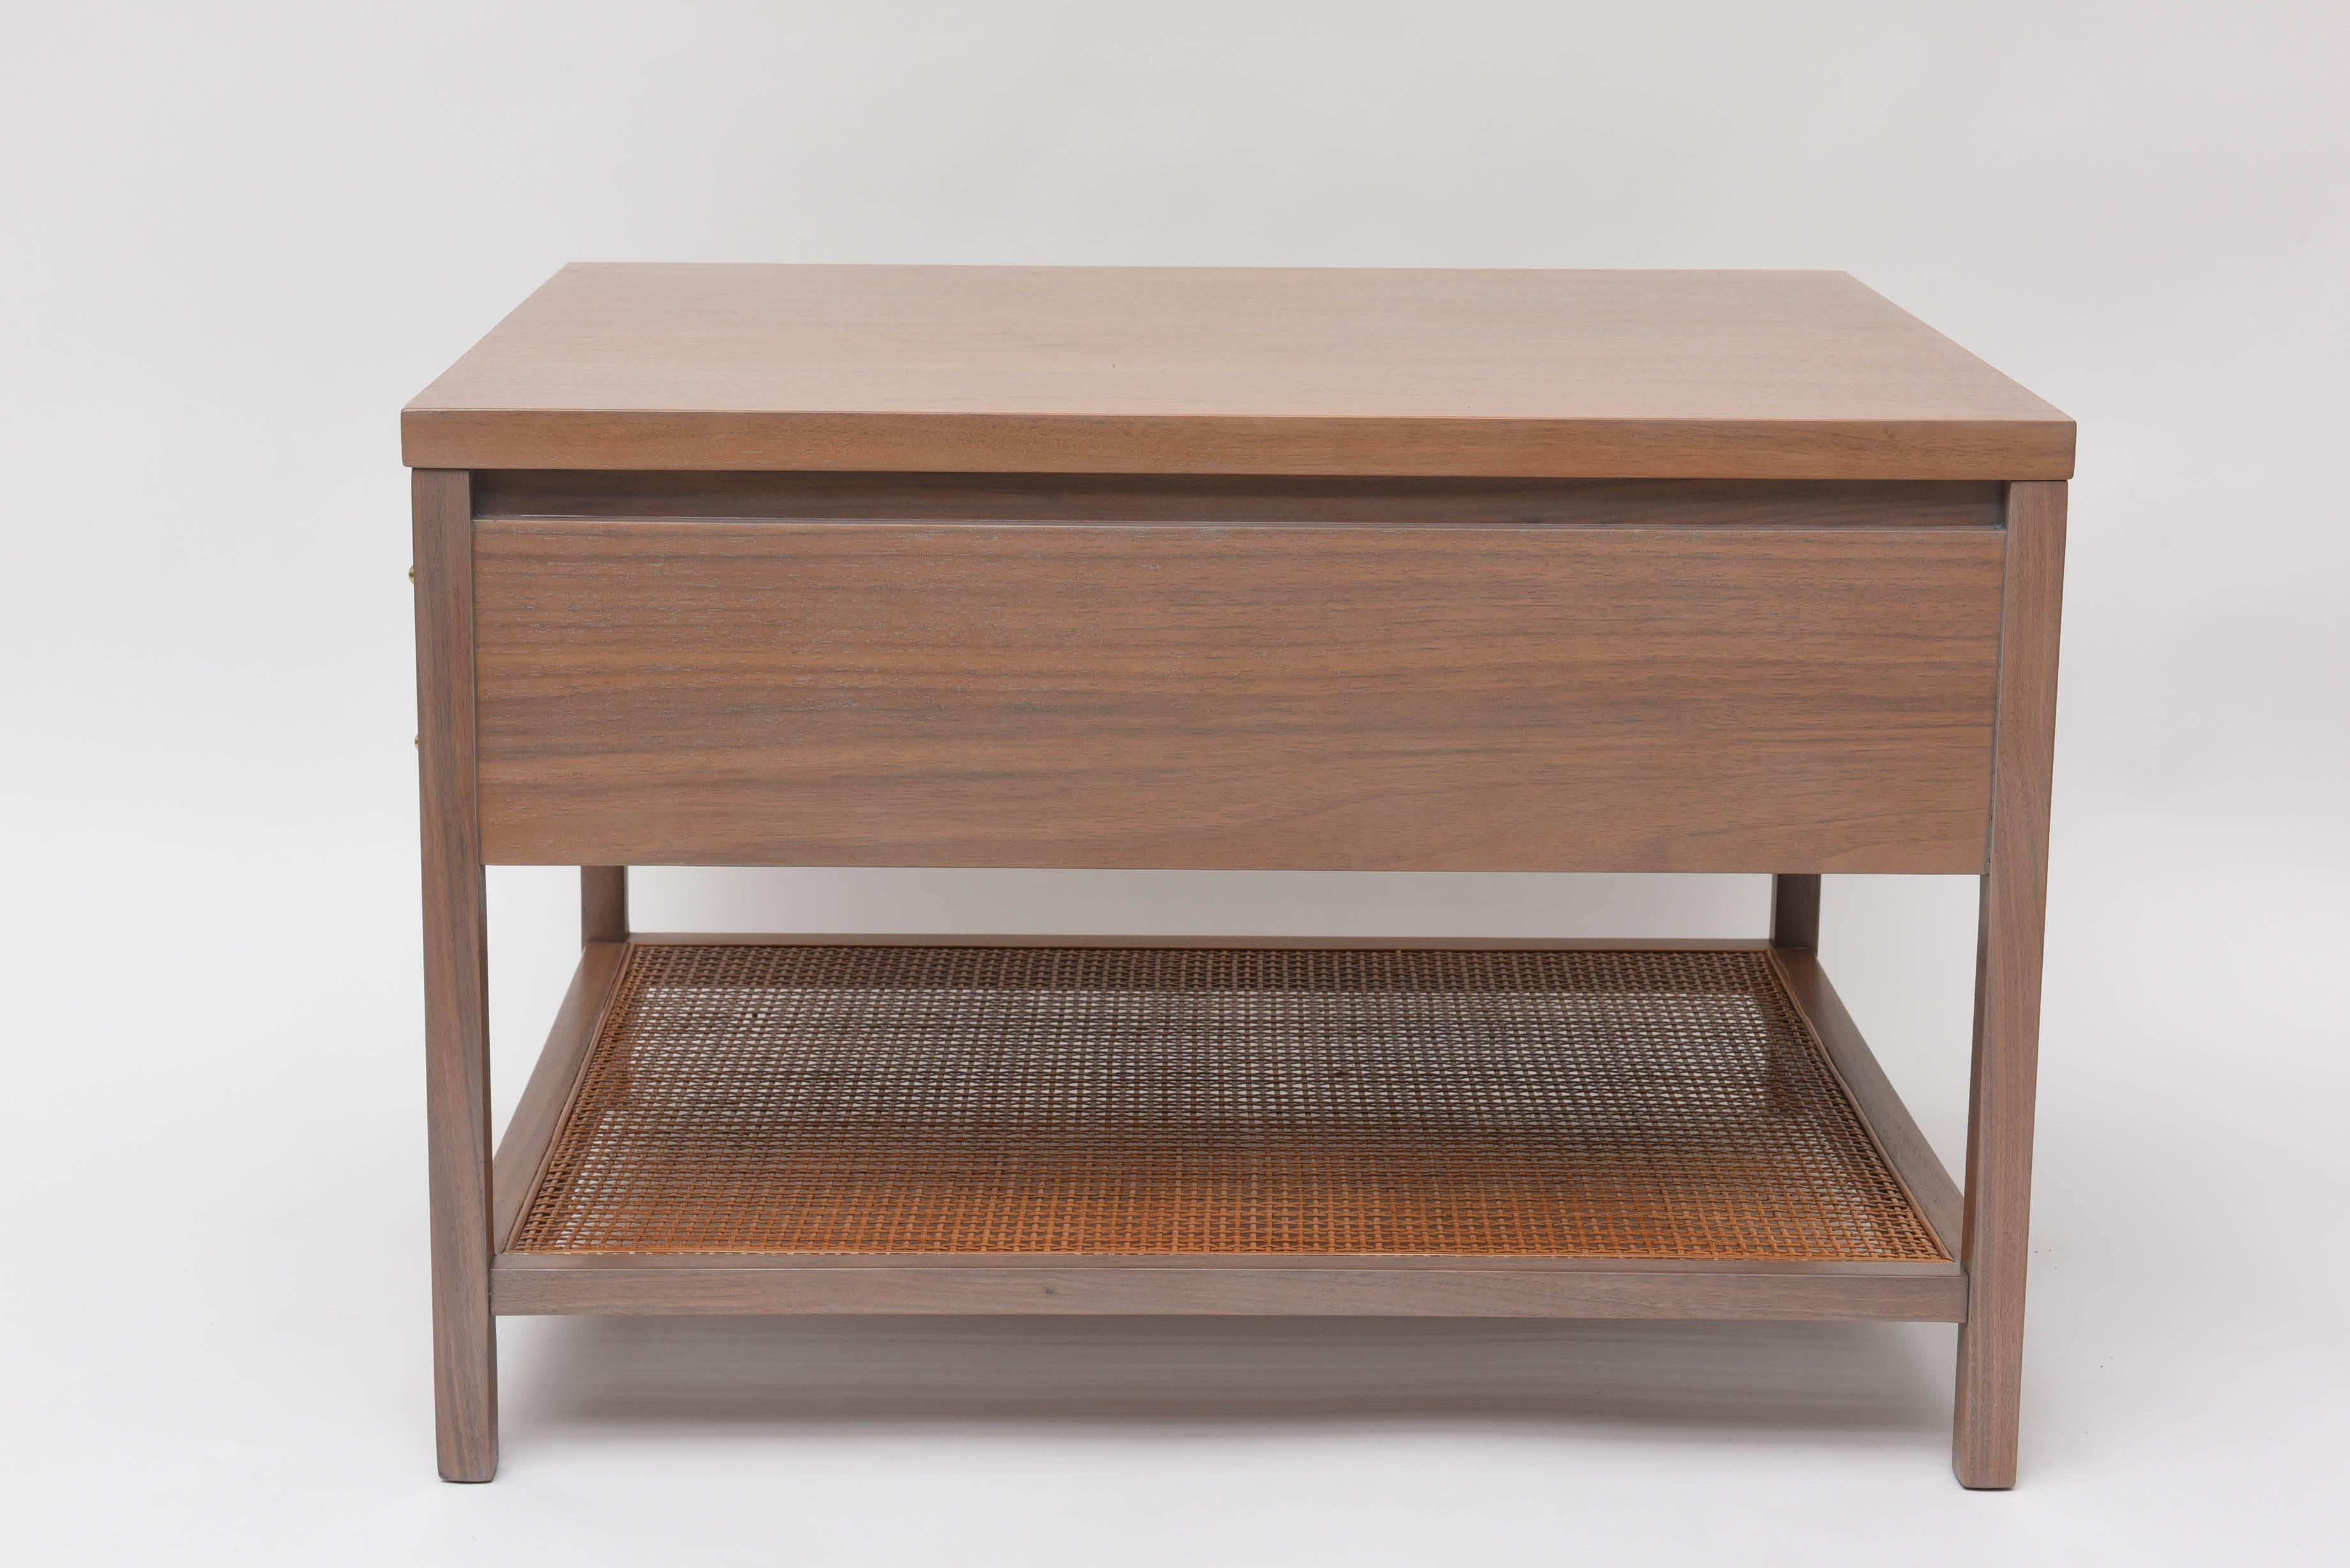 Mid-20th Century Walnut and Rattan Side Table by Paul McCobb for Calvin, USA Circa 1955